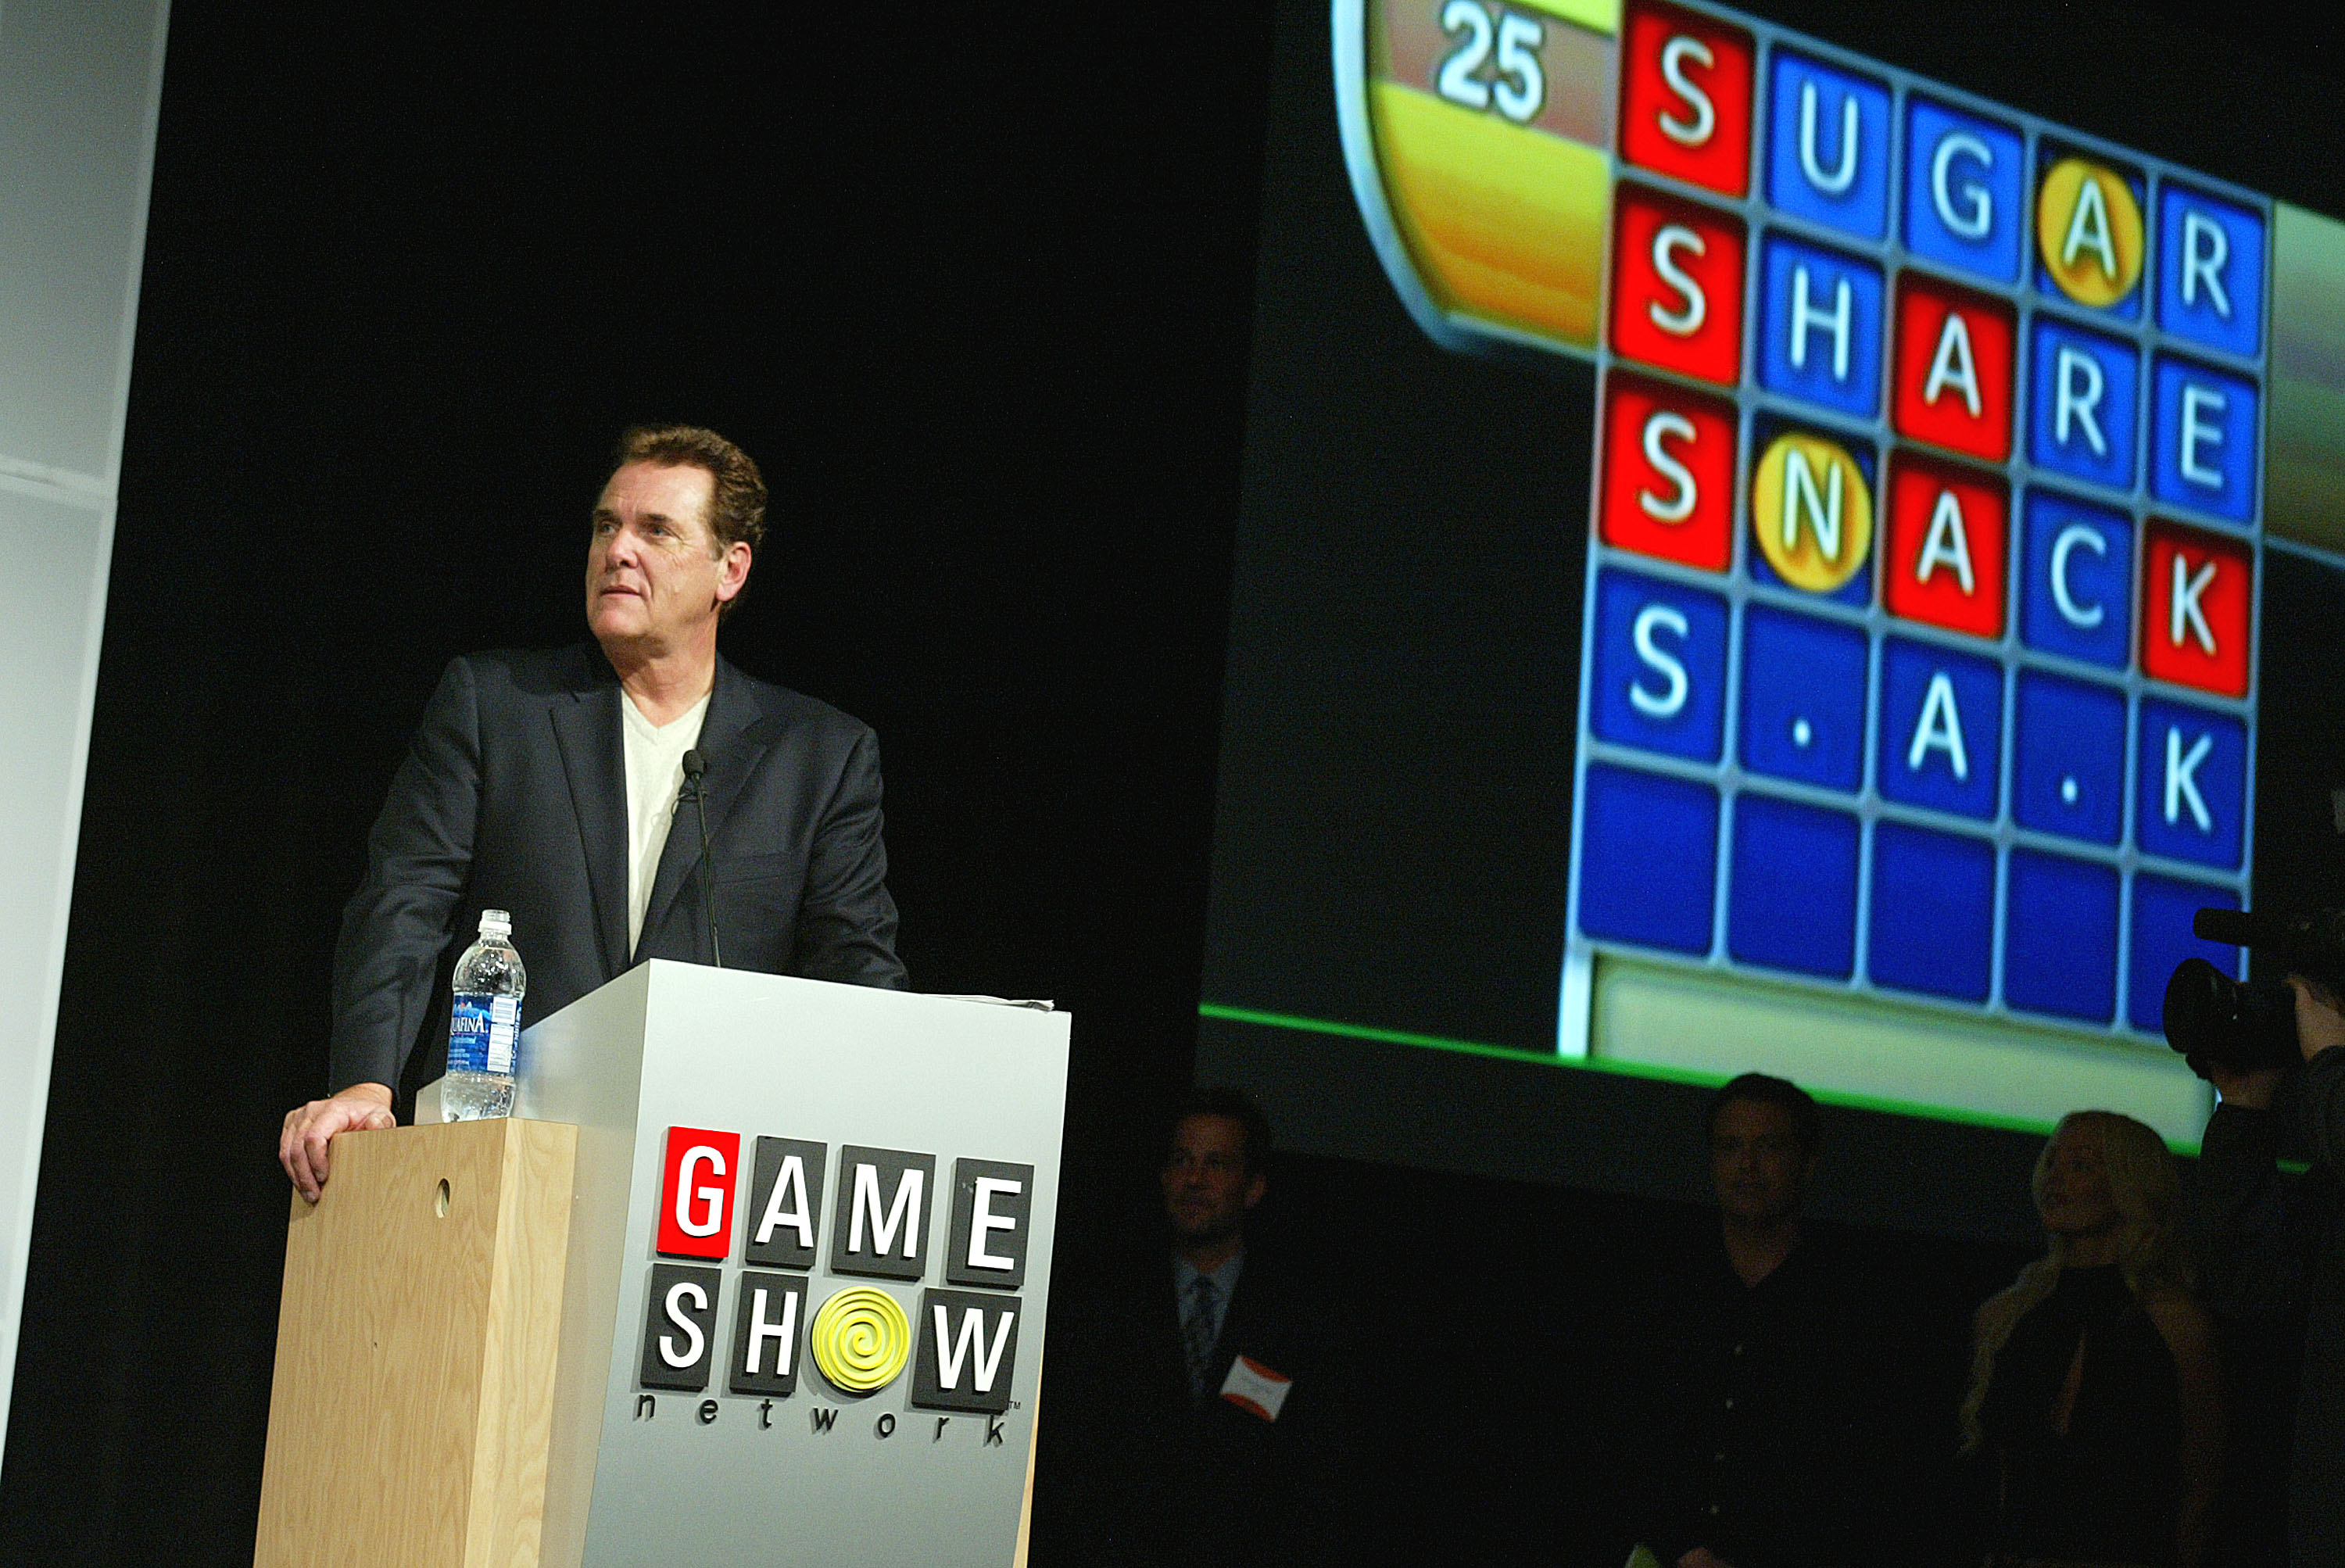 Chuck Woolery at a Game Show Networks event in 2003 in Los Angeles. (Photo: Kevin Winter/ImageDirect via Getty Images)